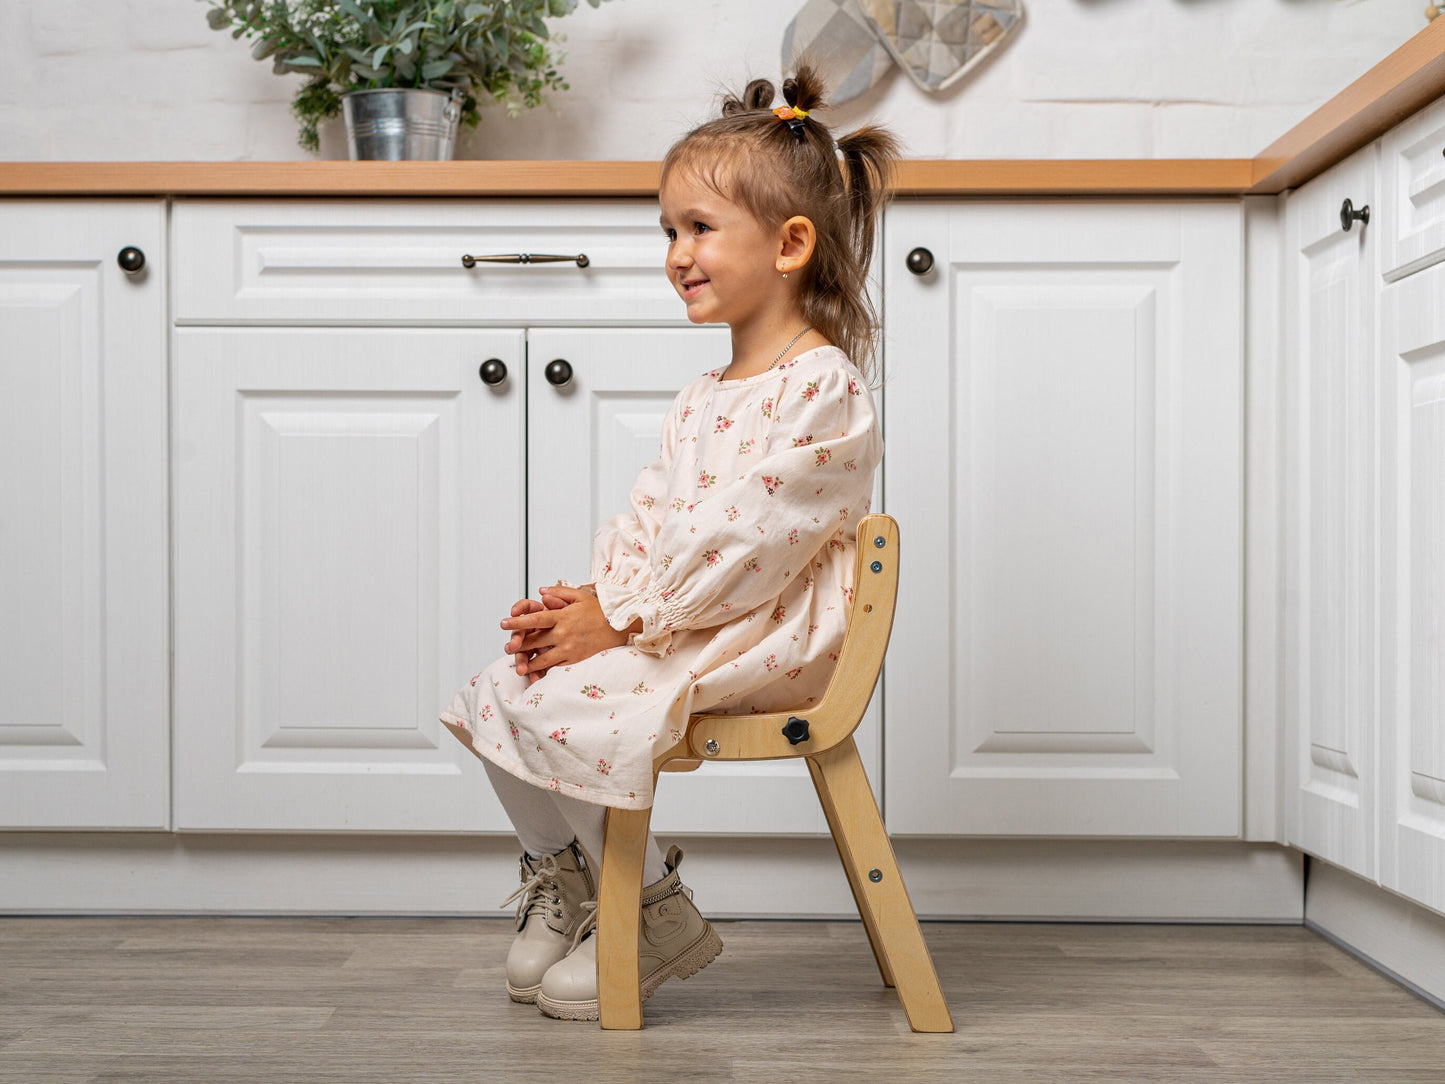 Toddler step stool & chair 2in1, toddler chair with back